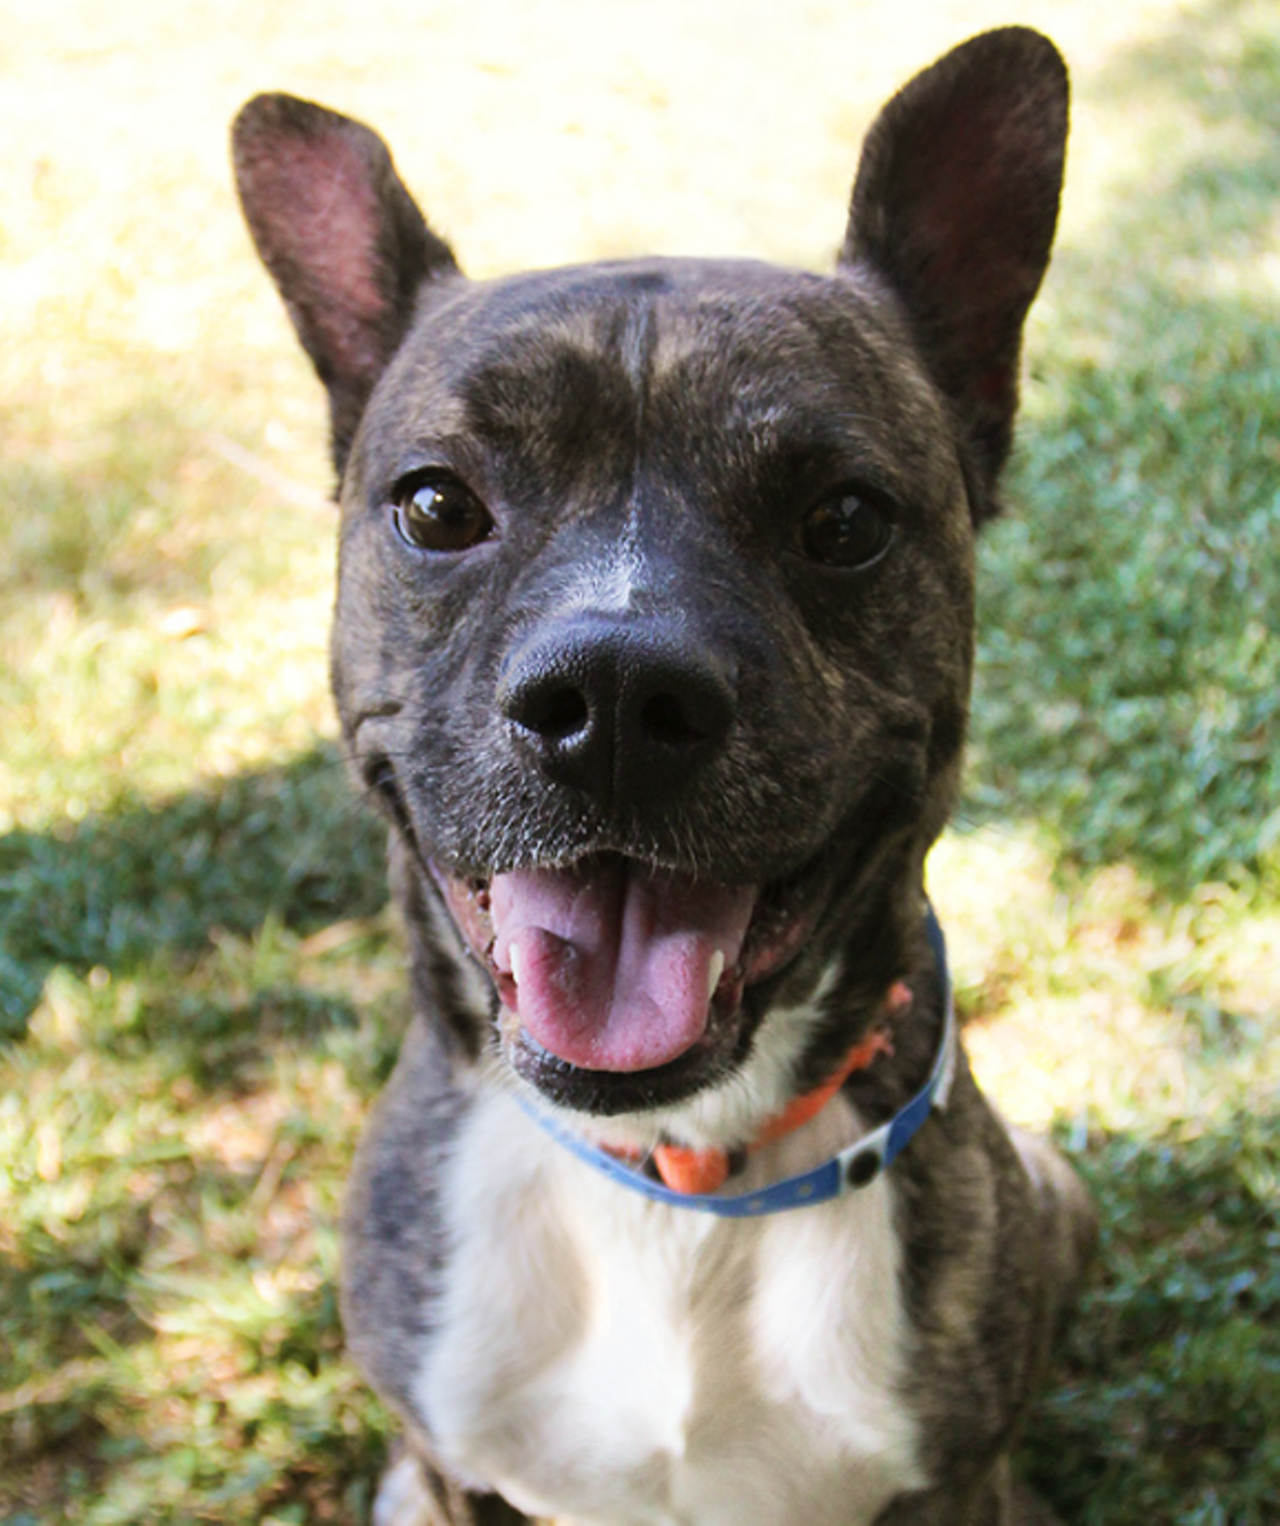 Rockford
"Heeeeeelllloooooo! I’m Rockford! I’m the new kid in town and I’m ready to rock-n-roll! I’m a bundle of energy who’s always gung ho to be taken for a walk! I will fit in best with an active person who can handle my excitement when I’m the leash. If you’re looking for a fun dog who’s ready to have a good time and cheer you up, then I’m you’re man! 😎"